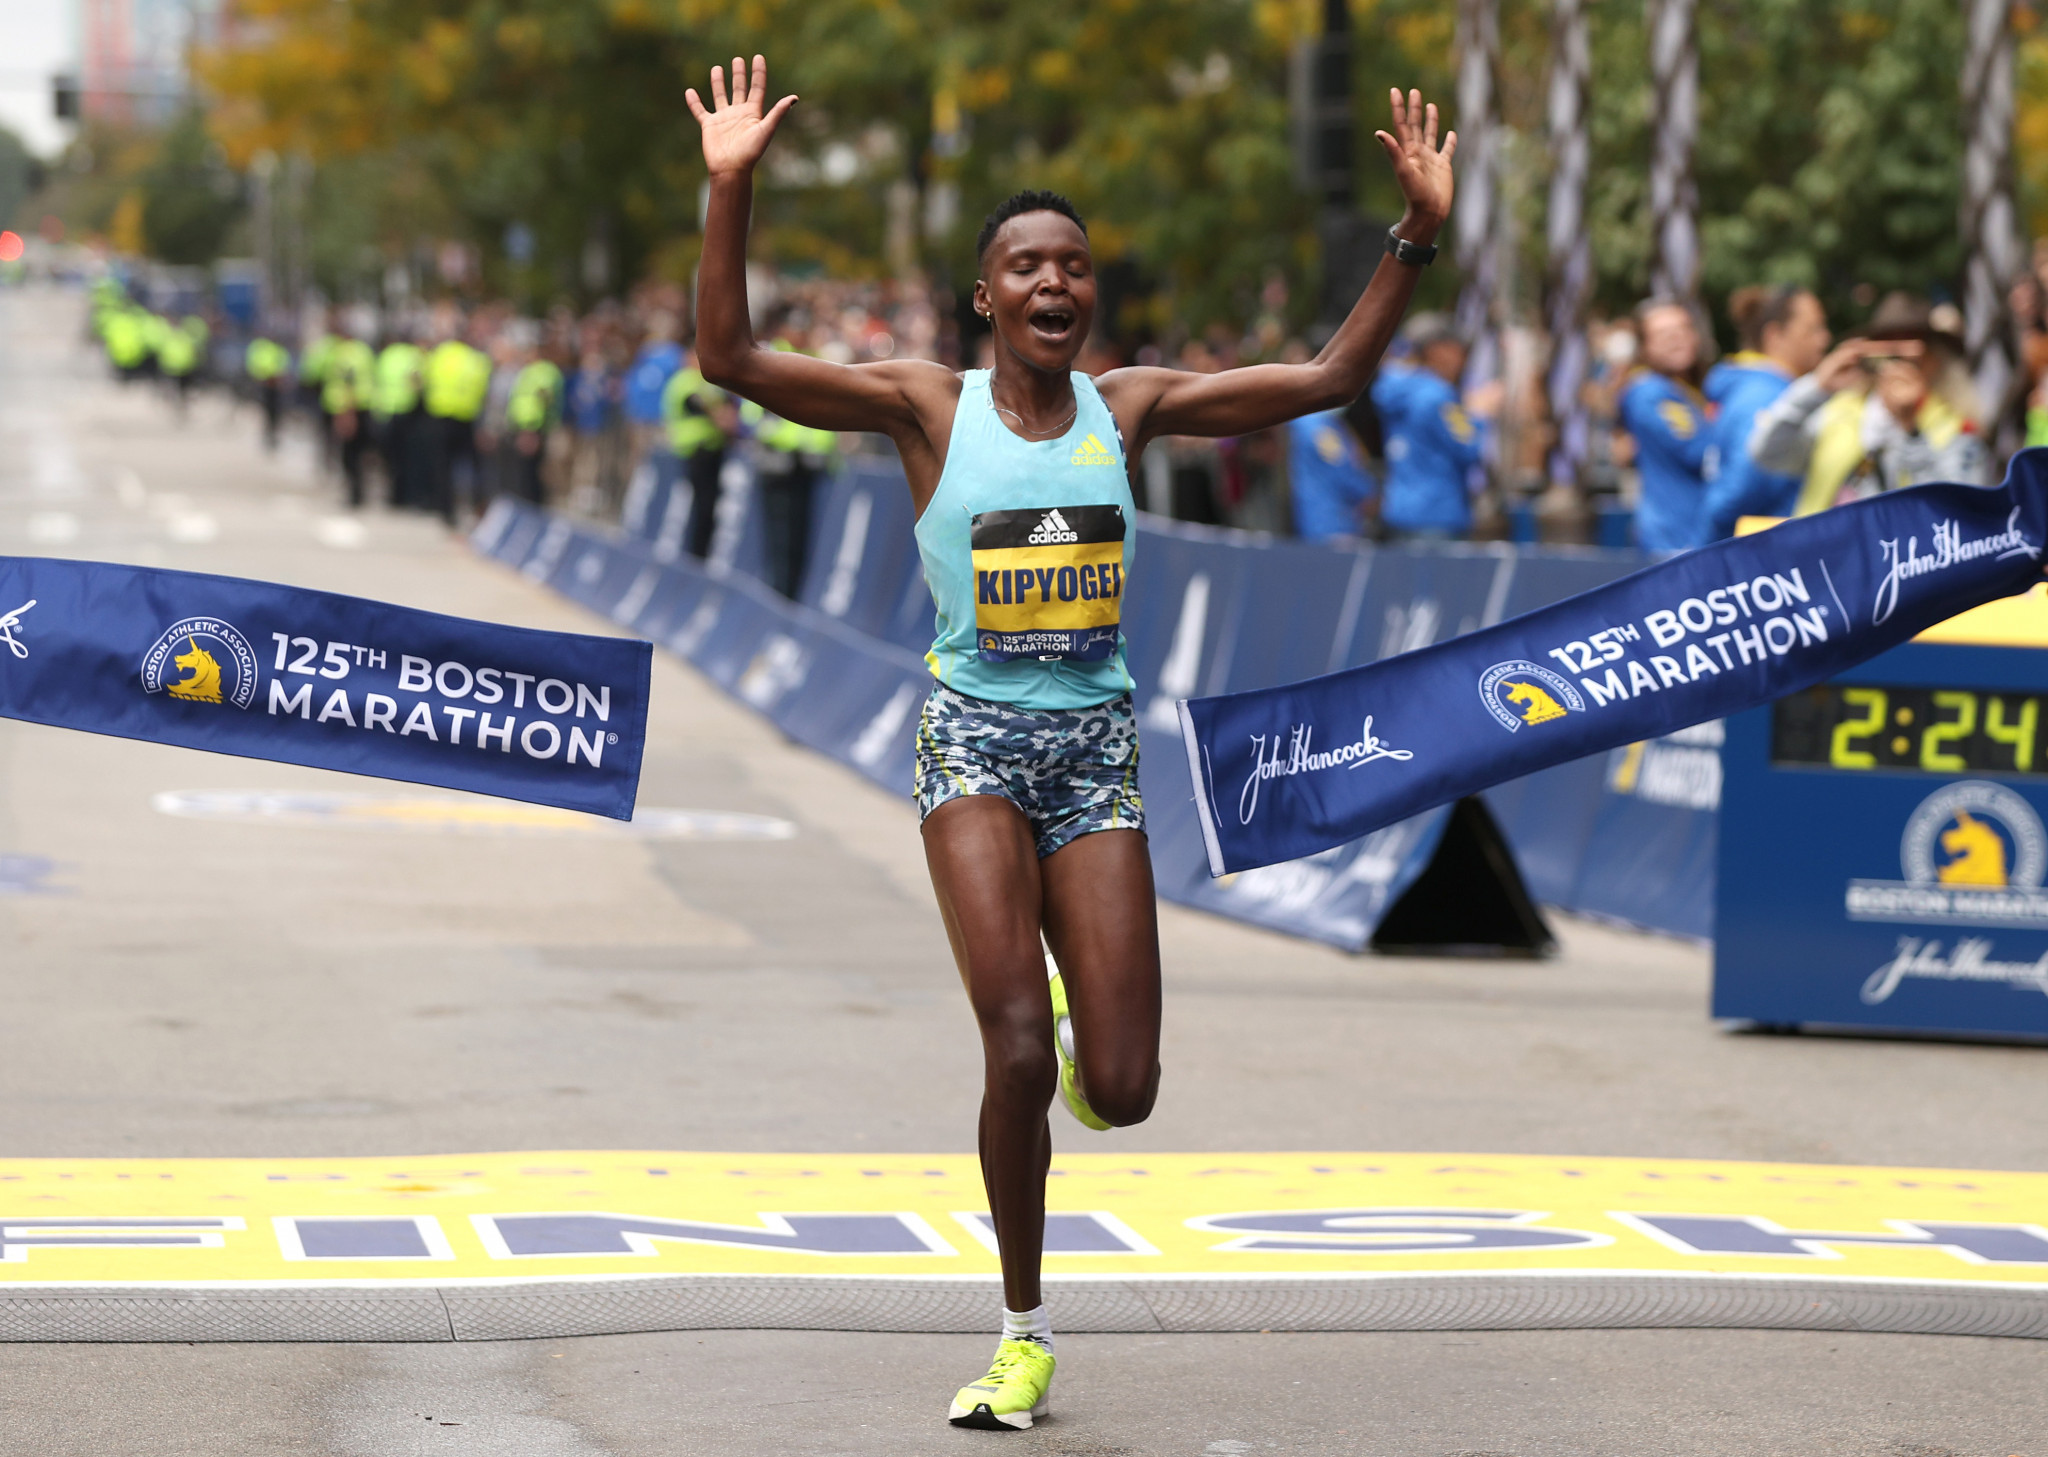 The Boston Marathon - won by Kenya's Diana Kipyogei in the women's race last year - is one of the six World Marathon Majors ©Getty Images